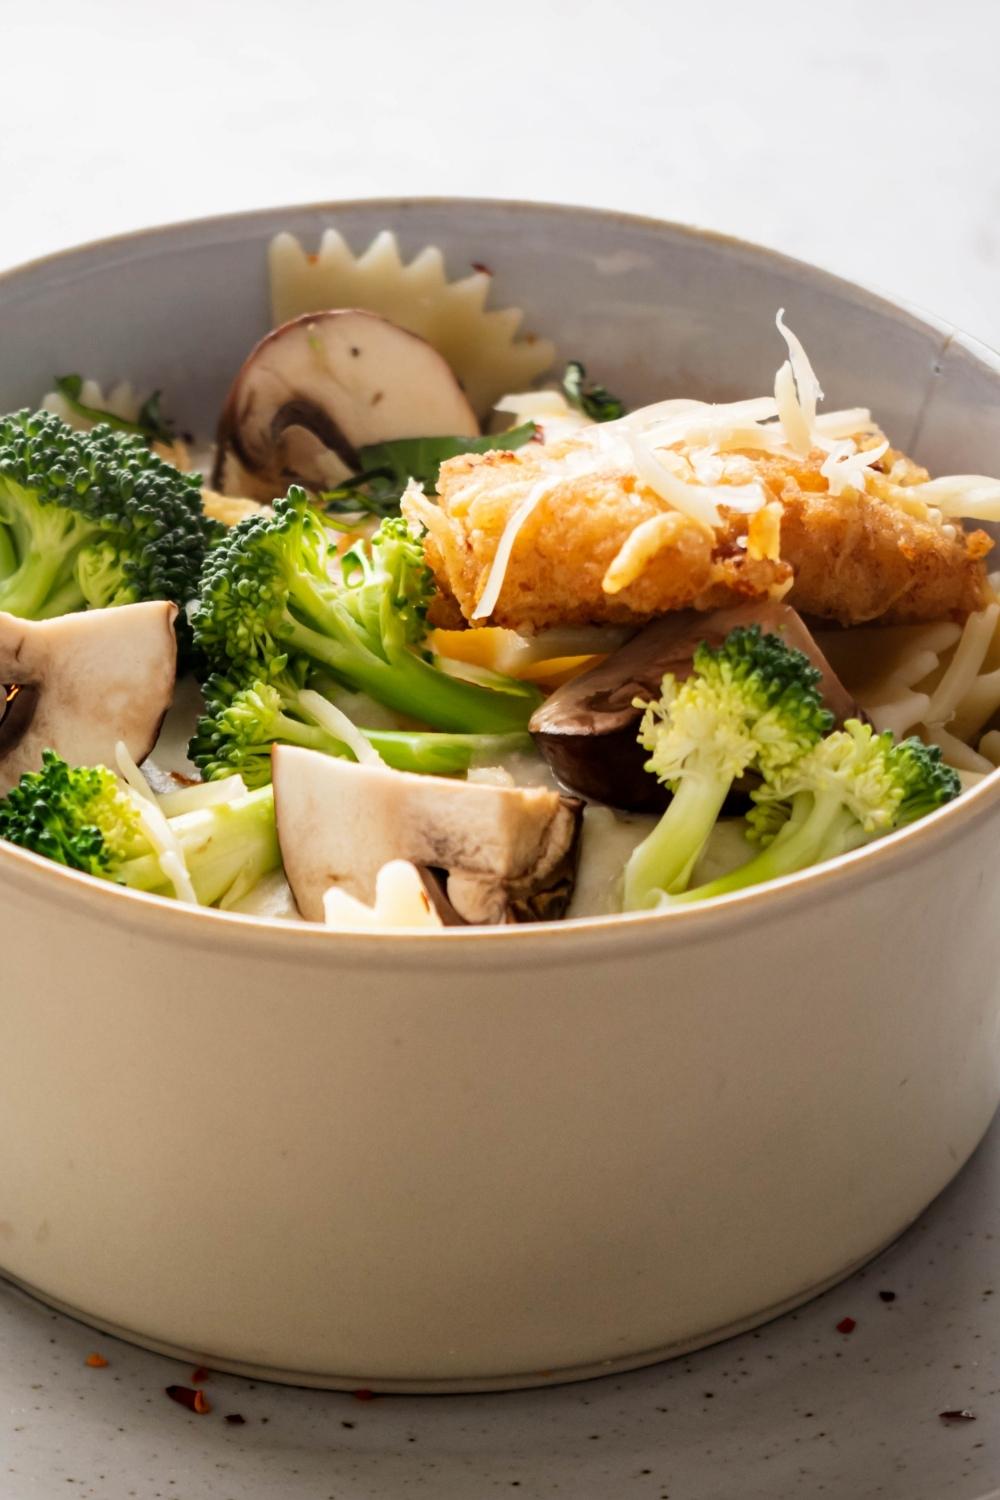 A bowl filled with broccoli, a piece of crispy chicken fritta, mushrooms, and bow tie pasta.